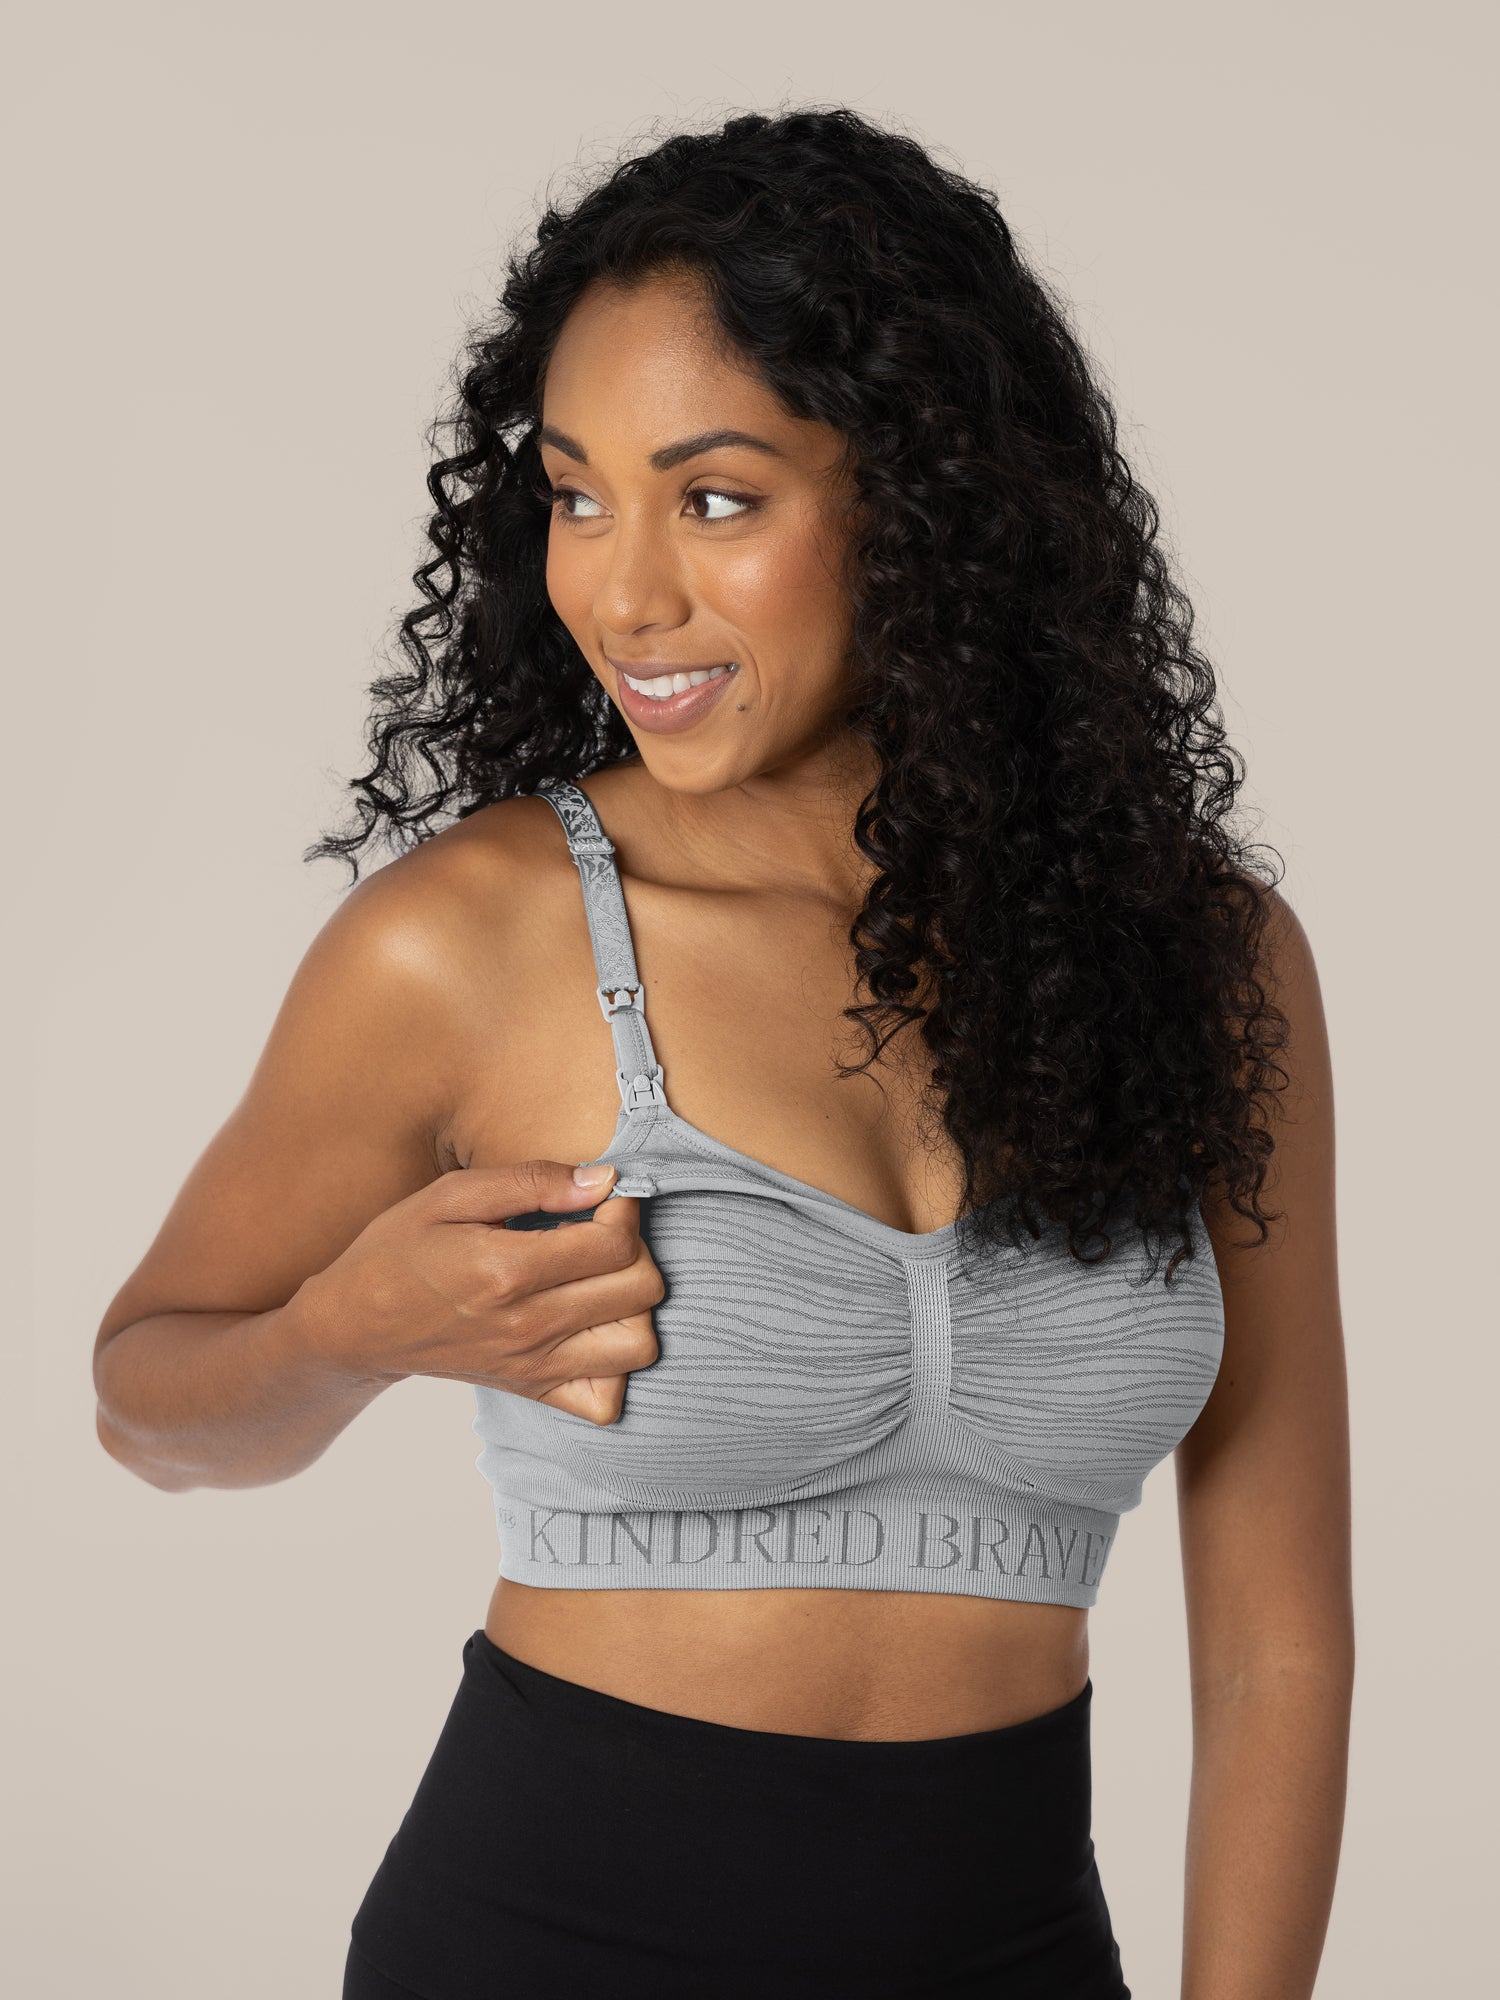 The Best Nursing Bras That You Can Buy on